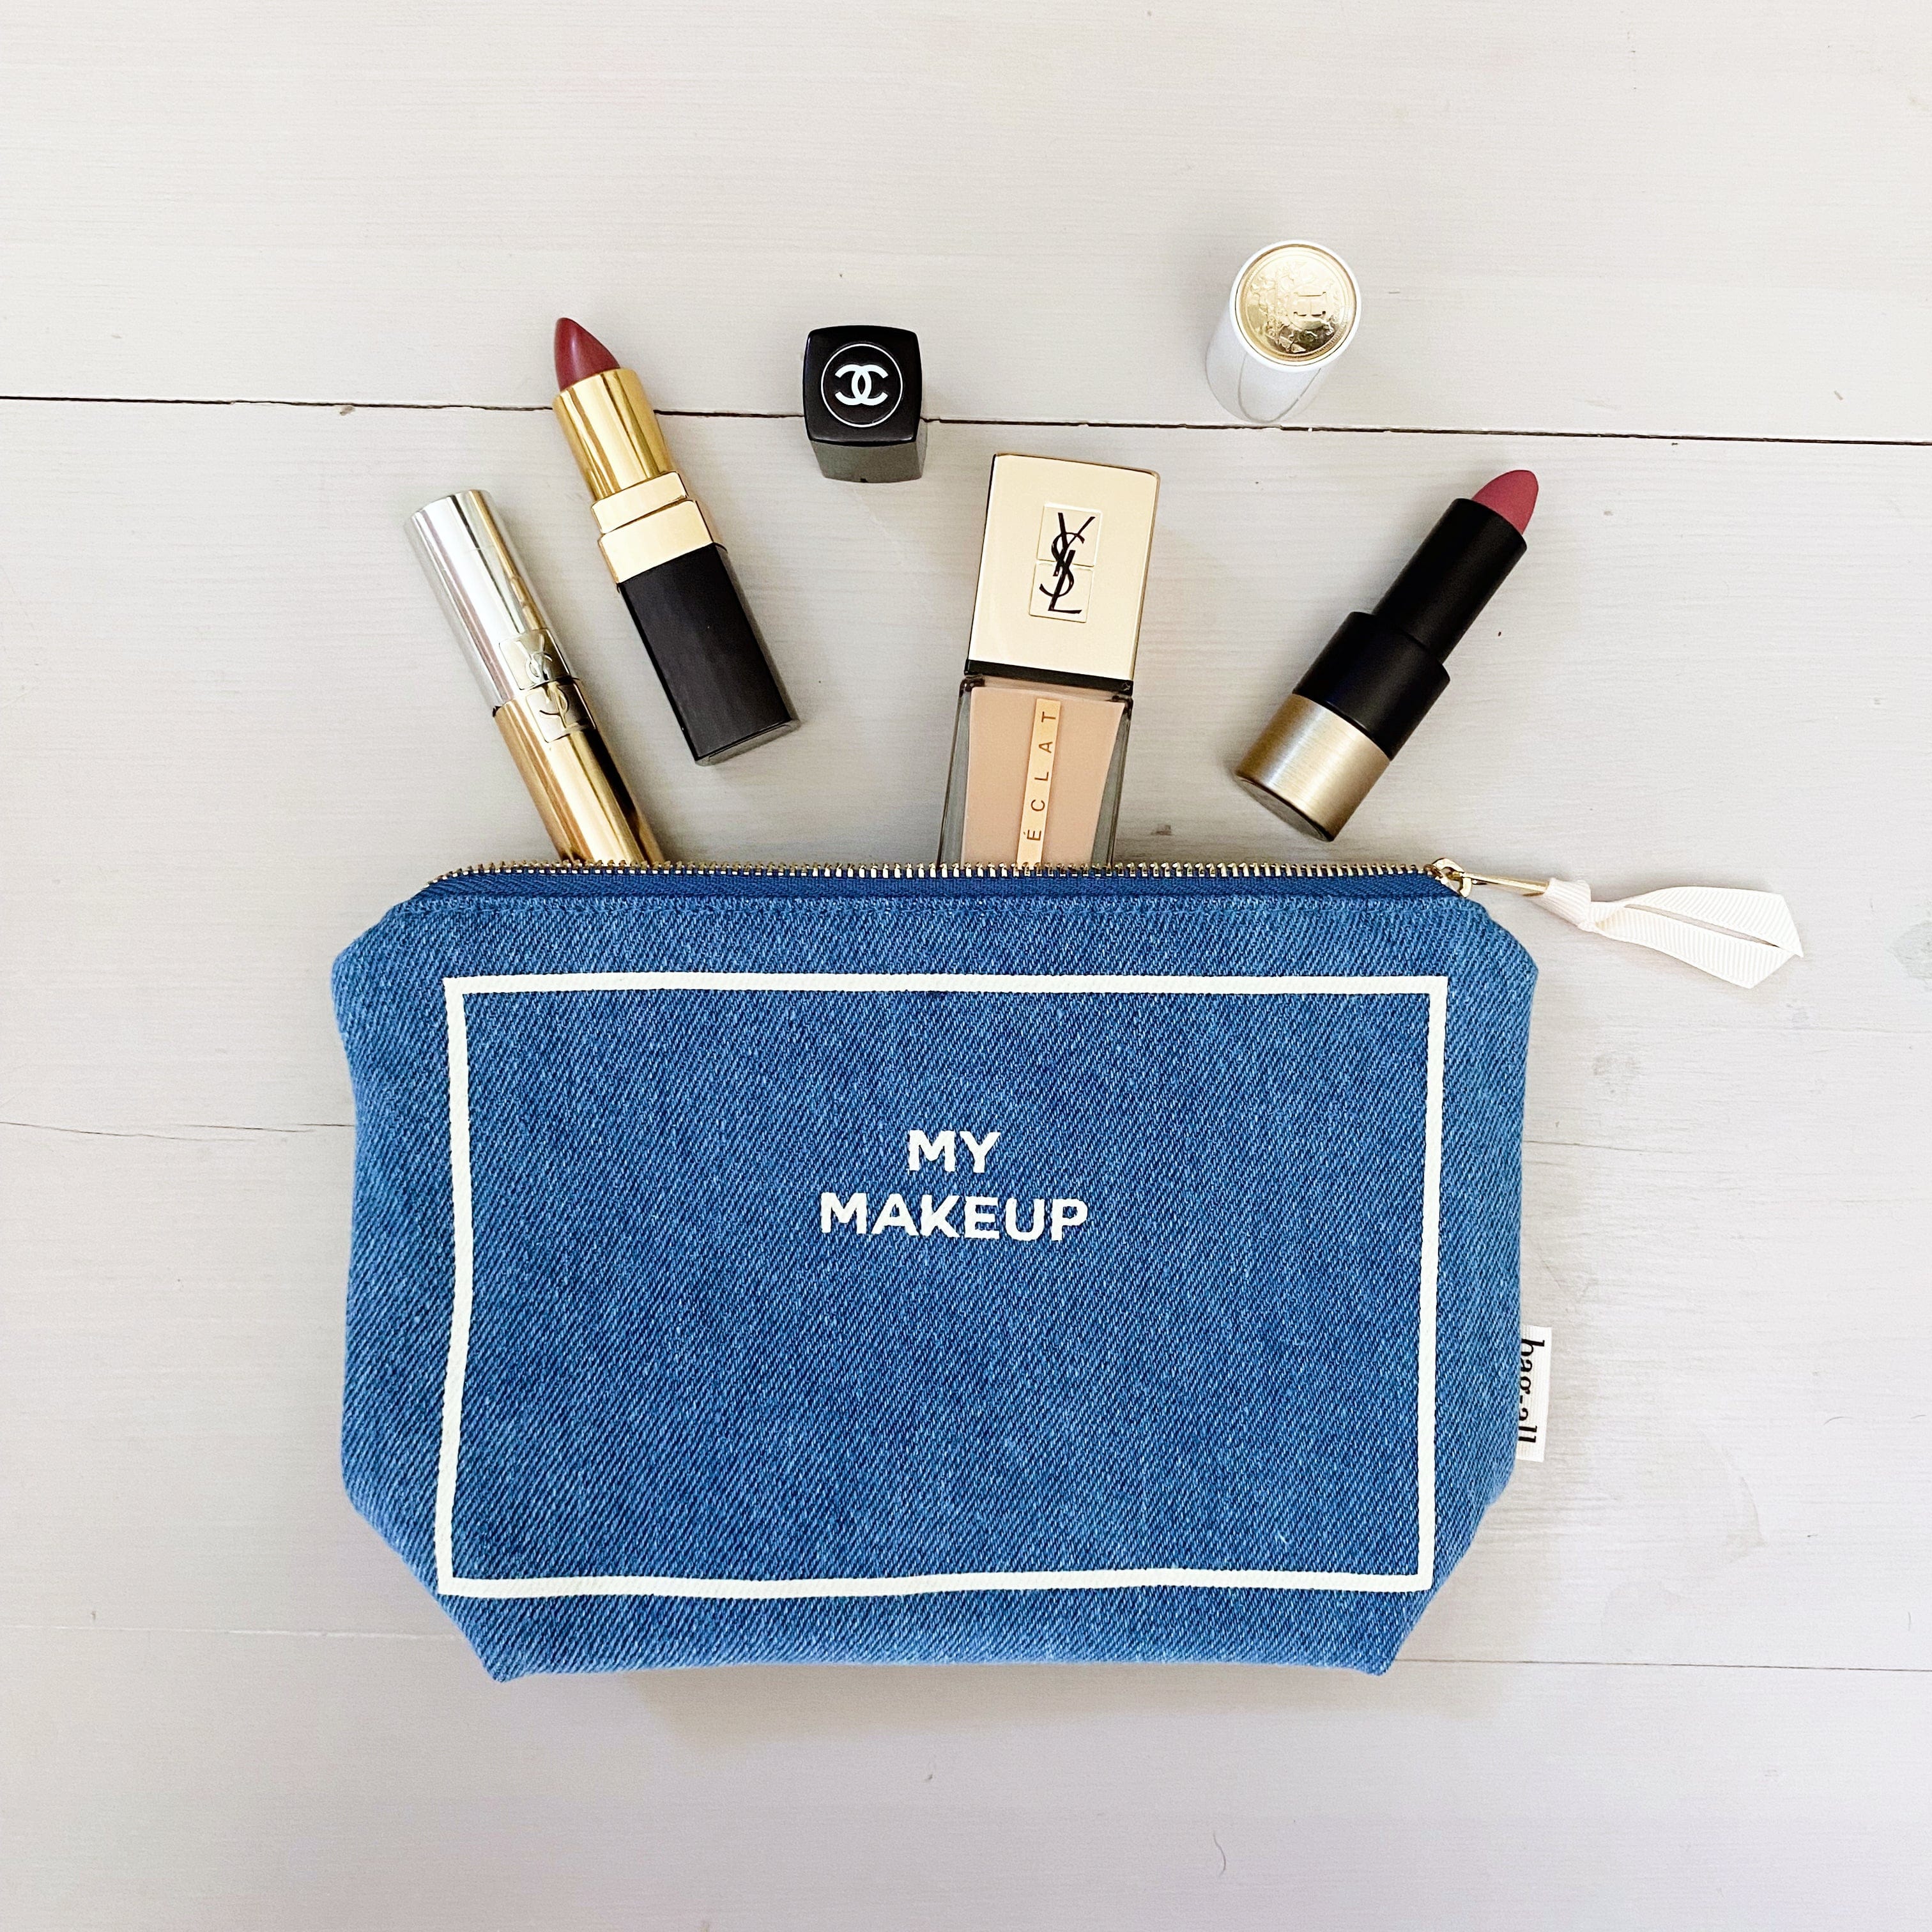 My Makeup Pouch, Coated Lining Denim | Bag-all